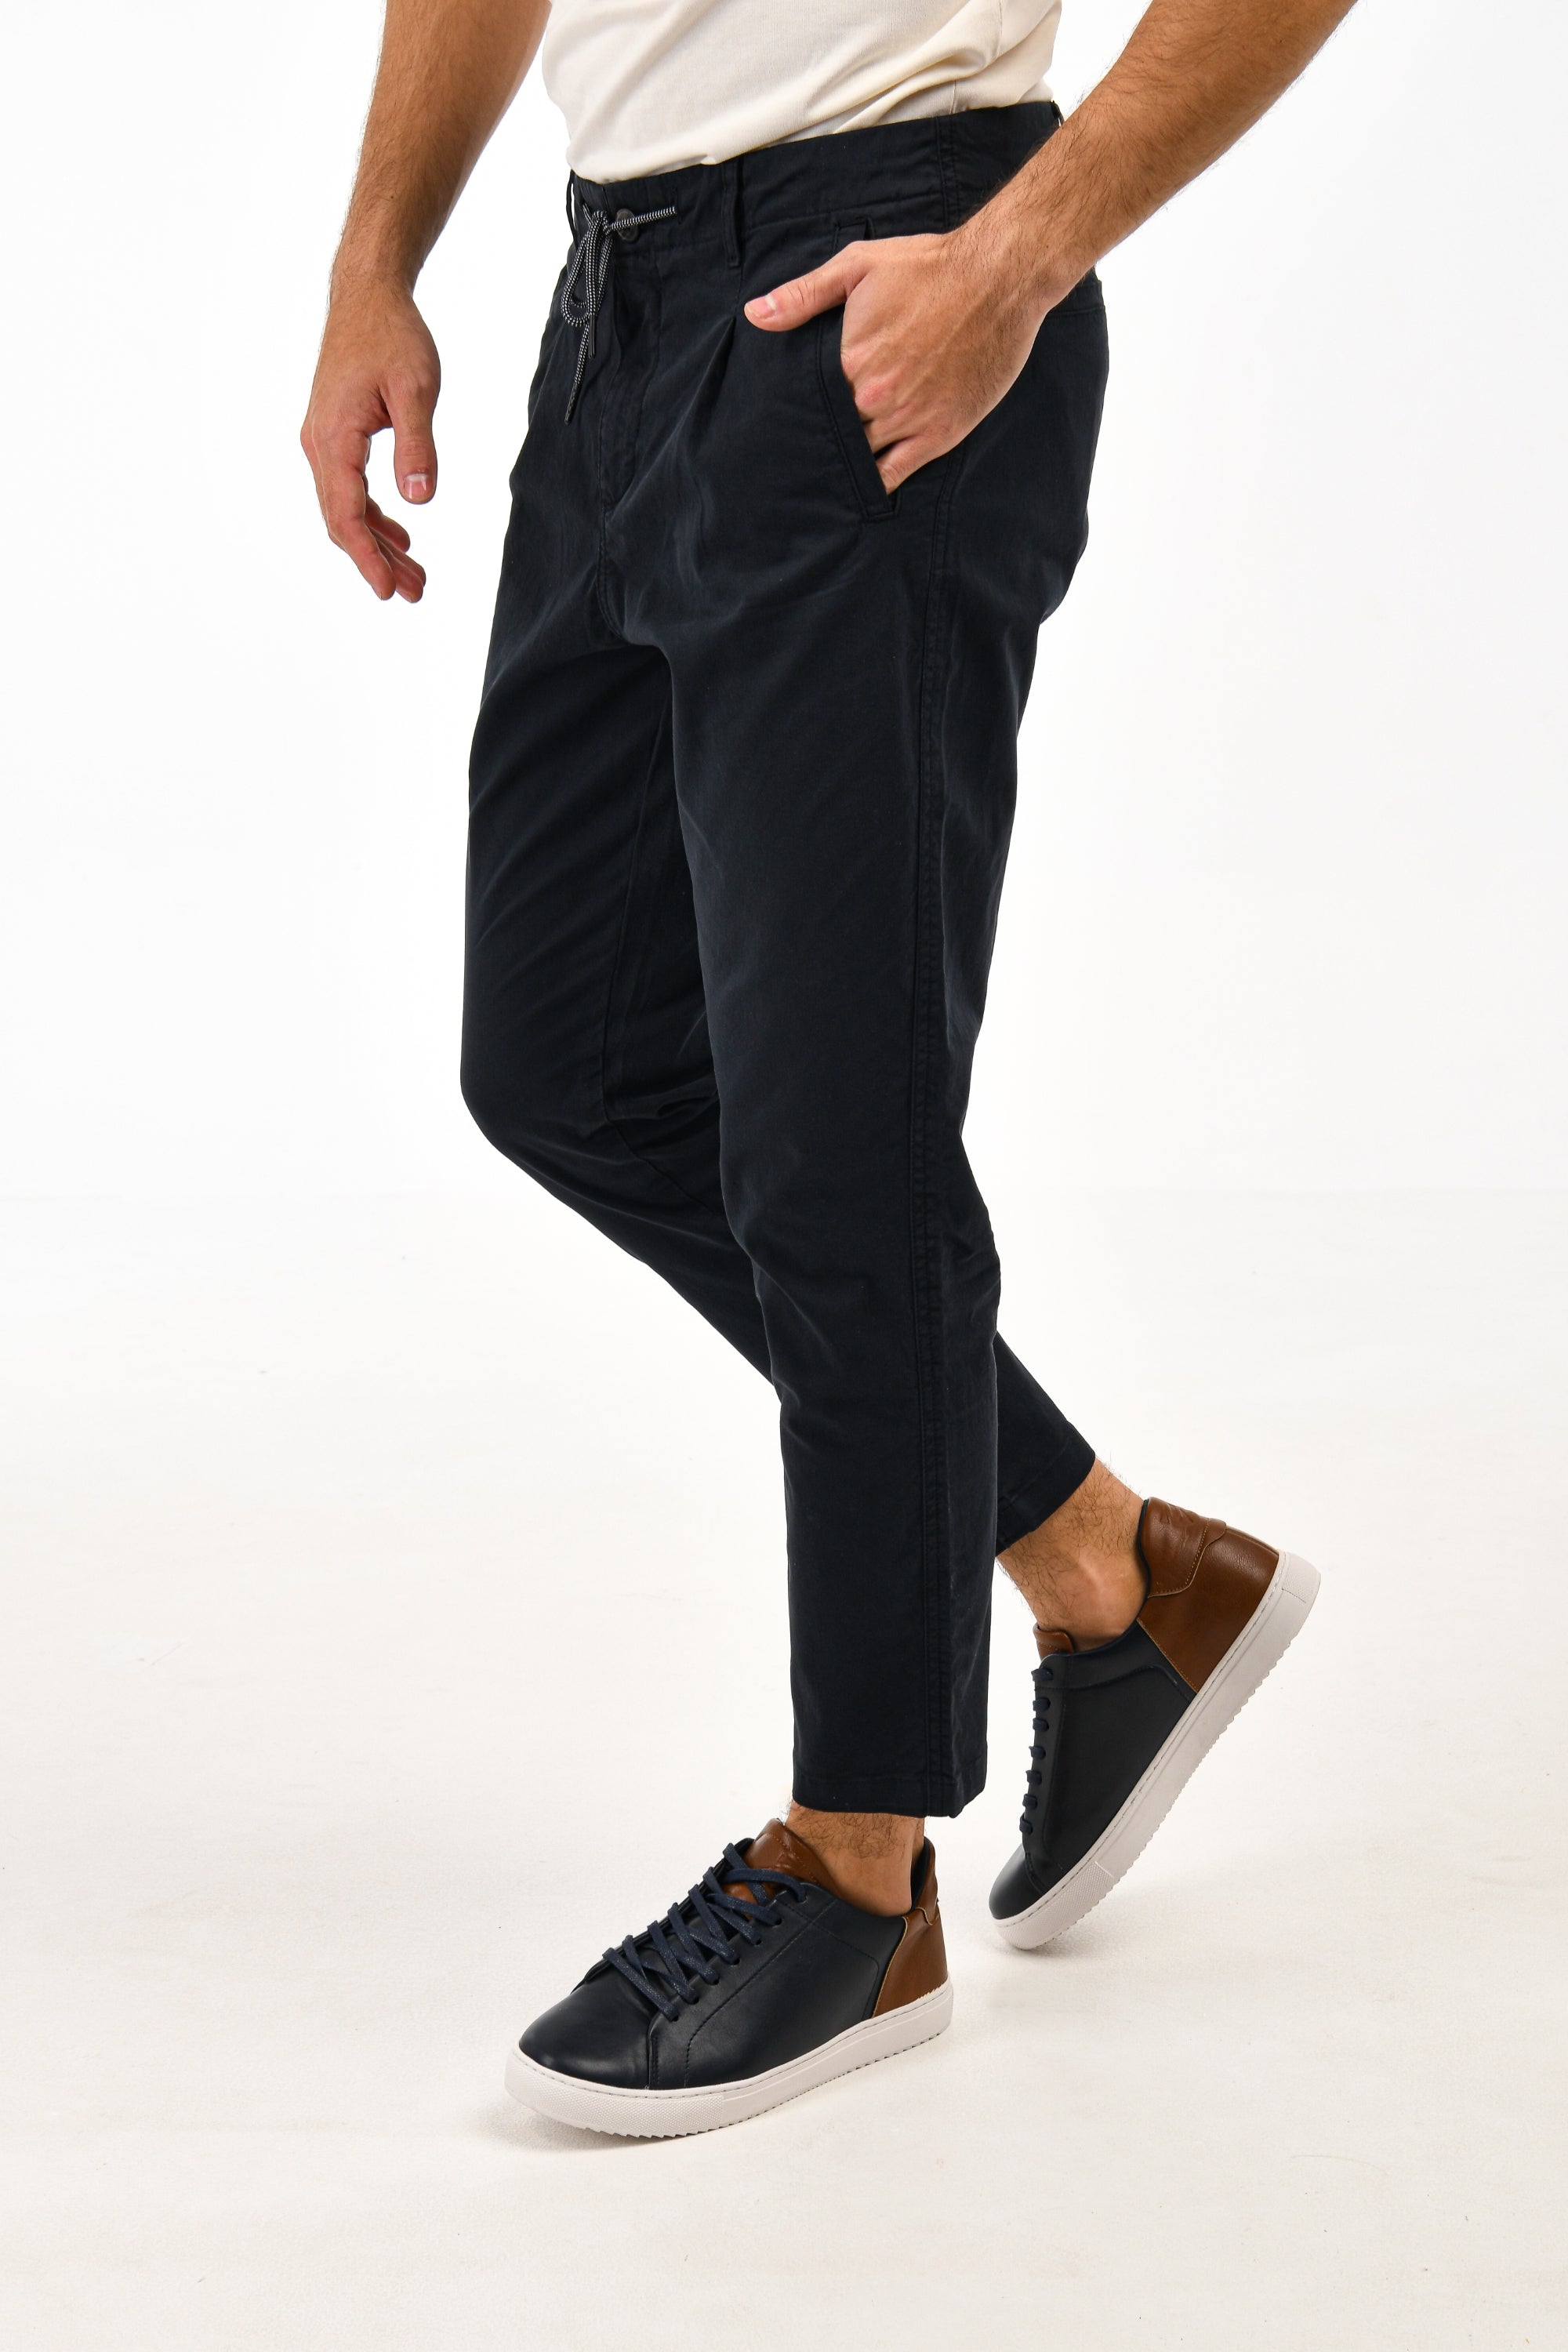 Cropped Fit Black Chinos